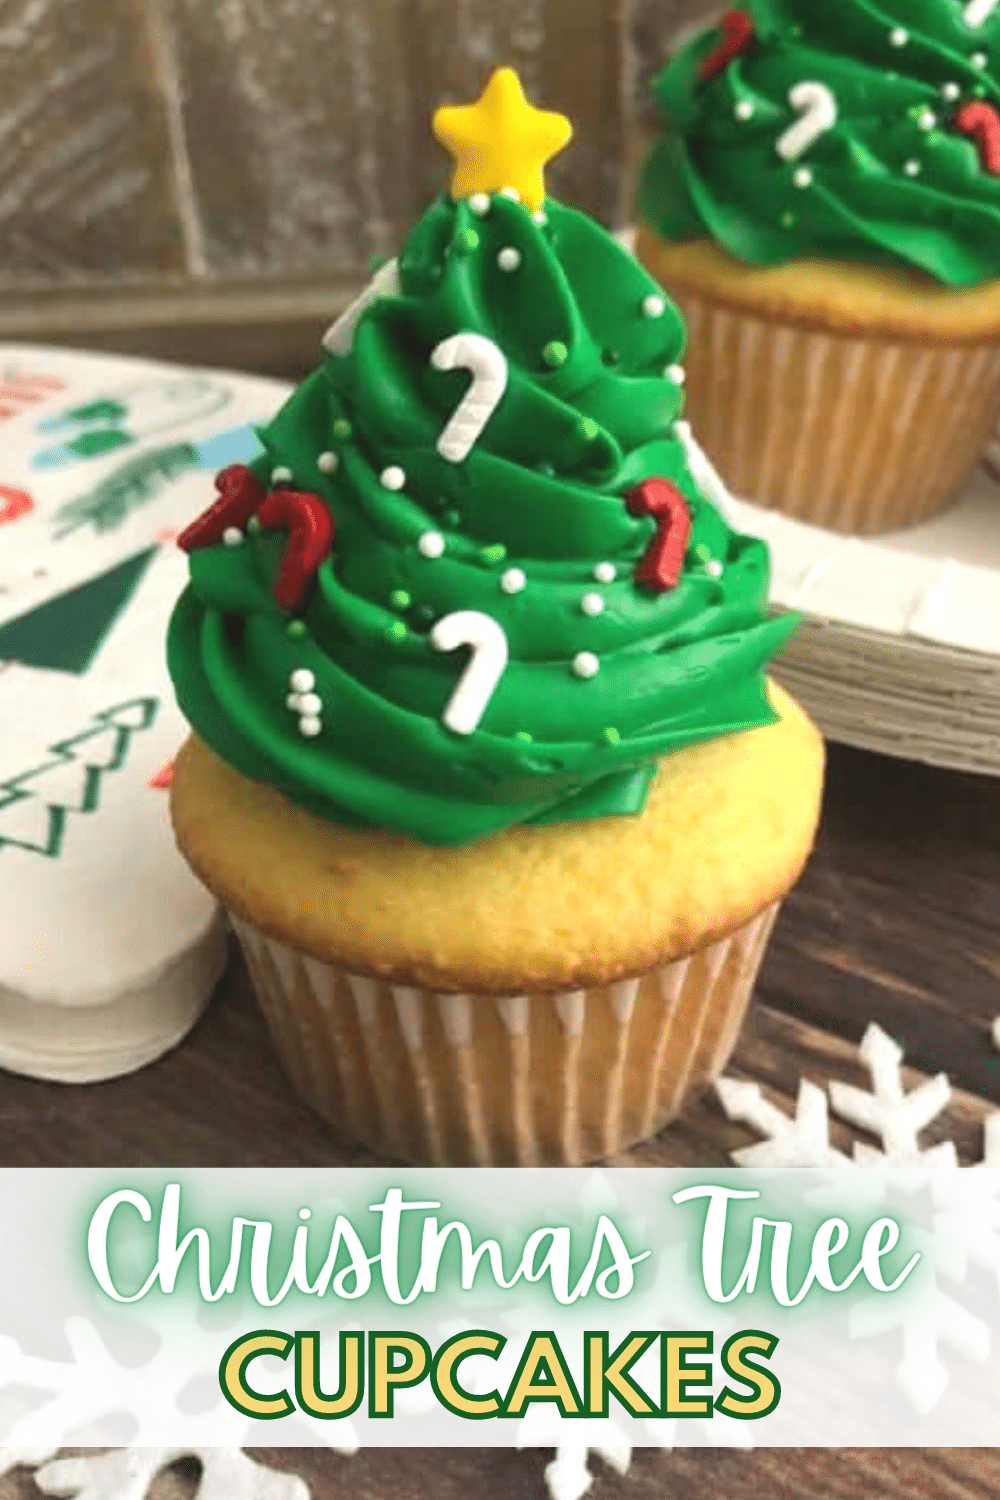 These Easy Christmas Tree Cupcakes are a delicious treat and adorable party decoration all in one! Why not dress up your dessert table with these standout desserts! #christmas #cupcakes #christmastree #recipe via @wondermomwannab